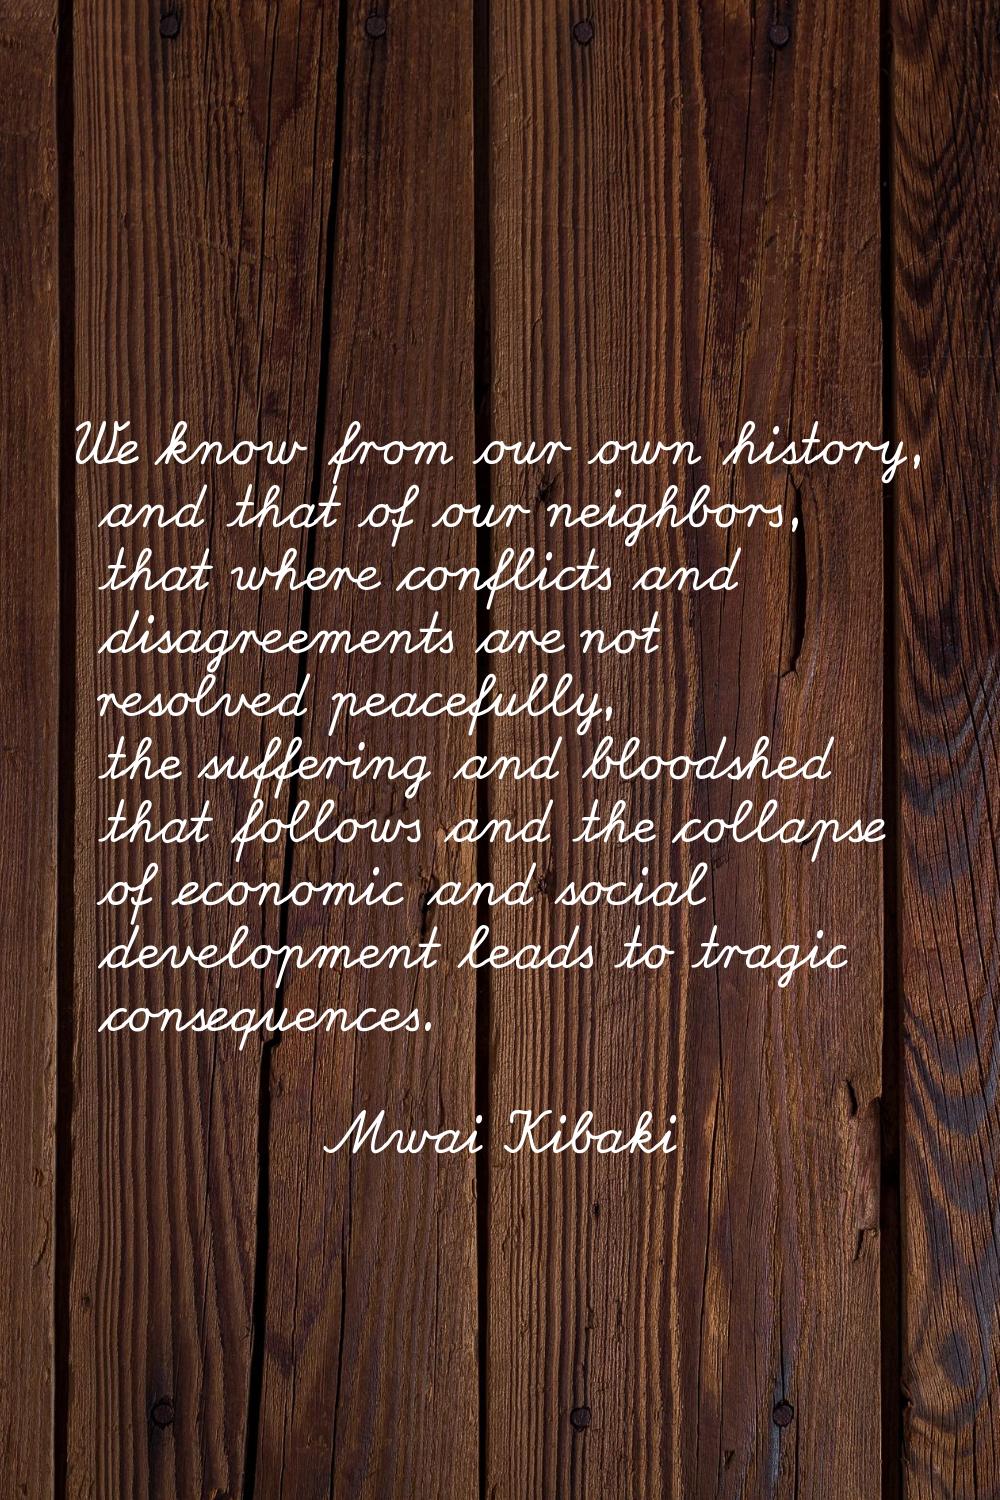 We know from our own history, and that of our neighbors, that where conflicts and disagreements are